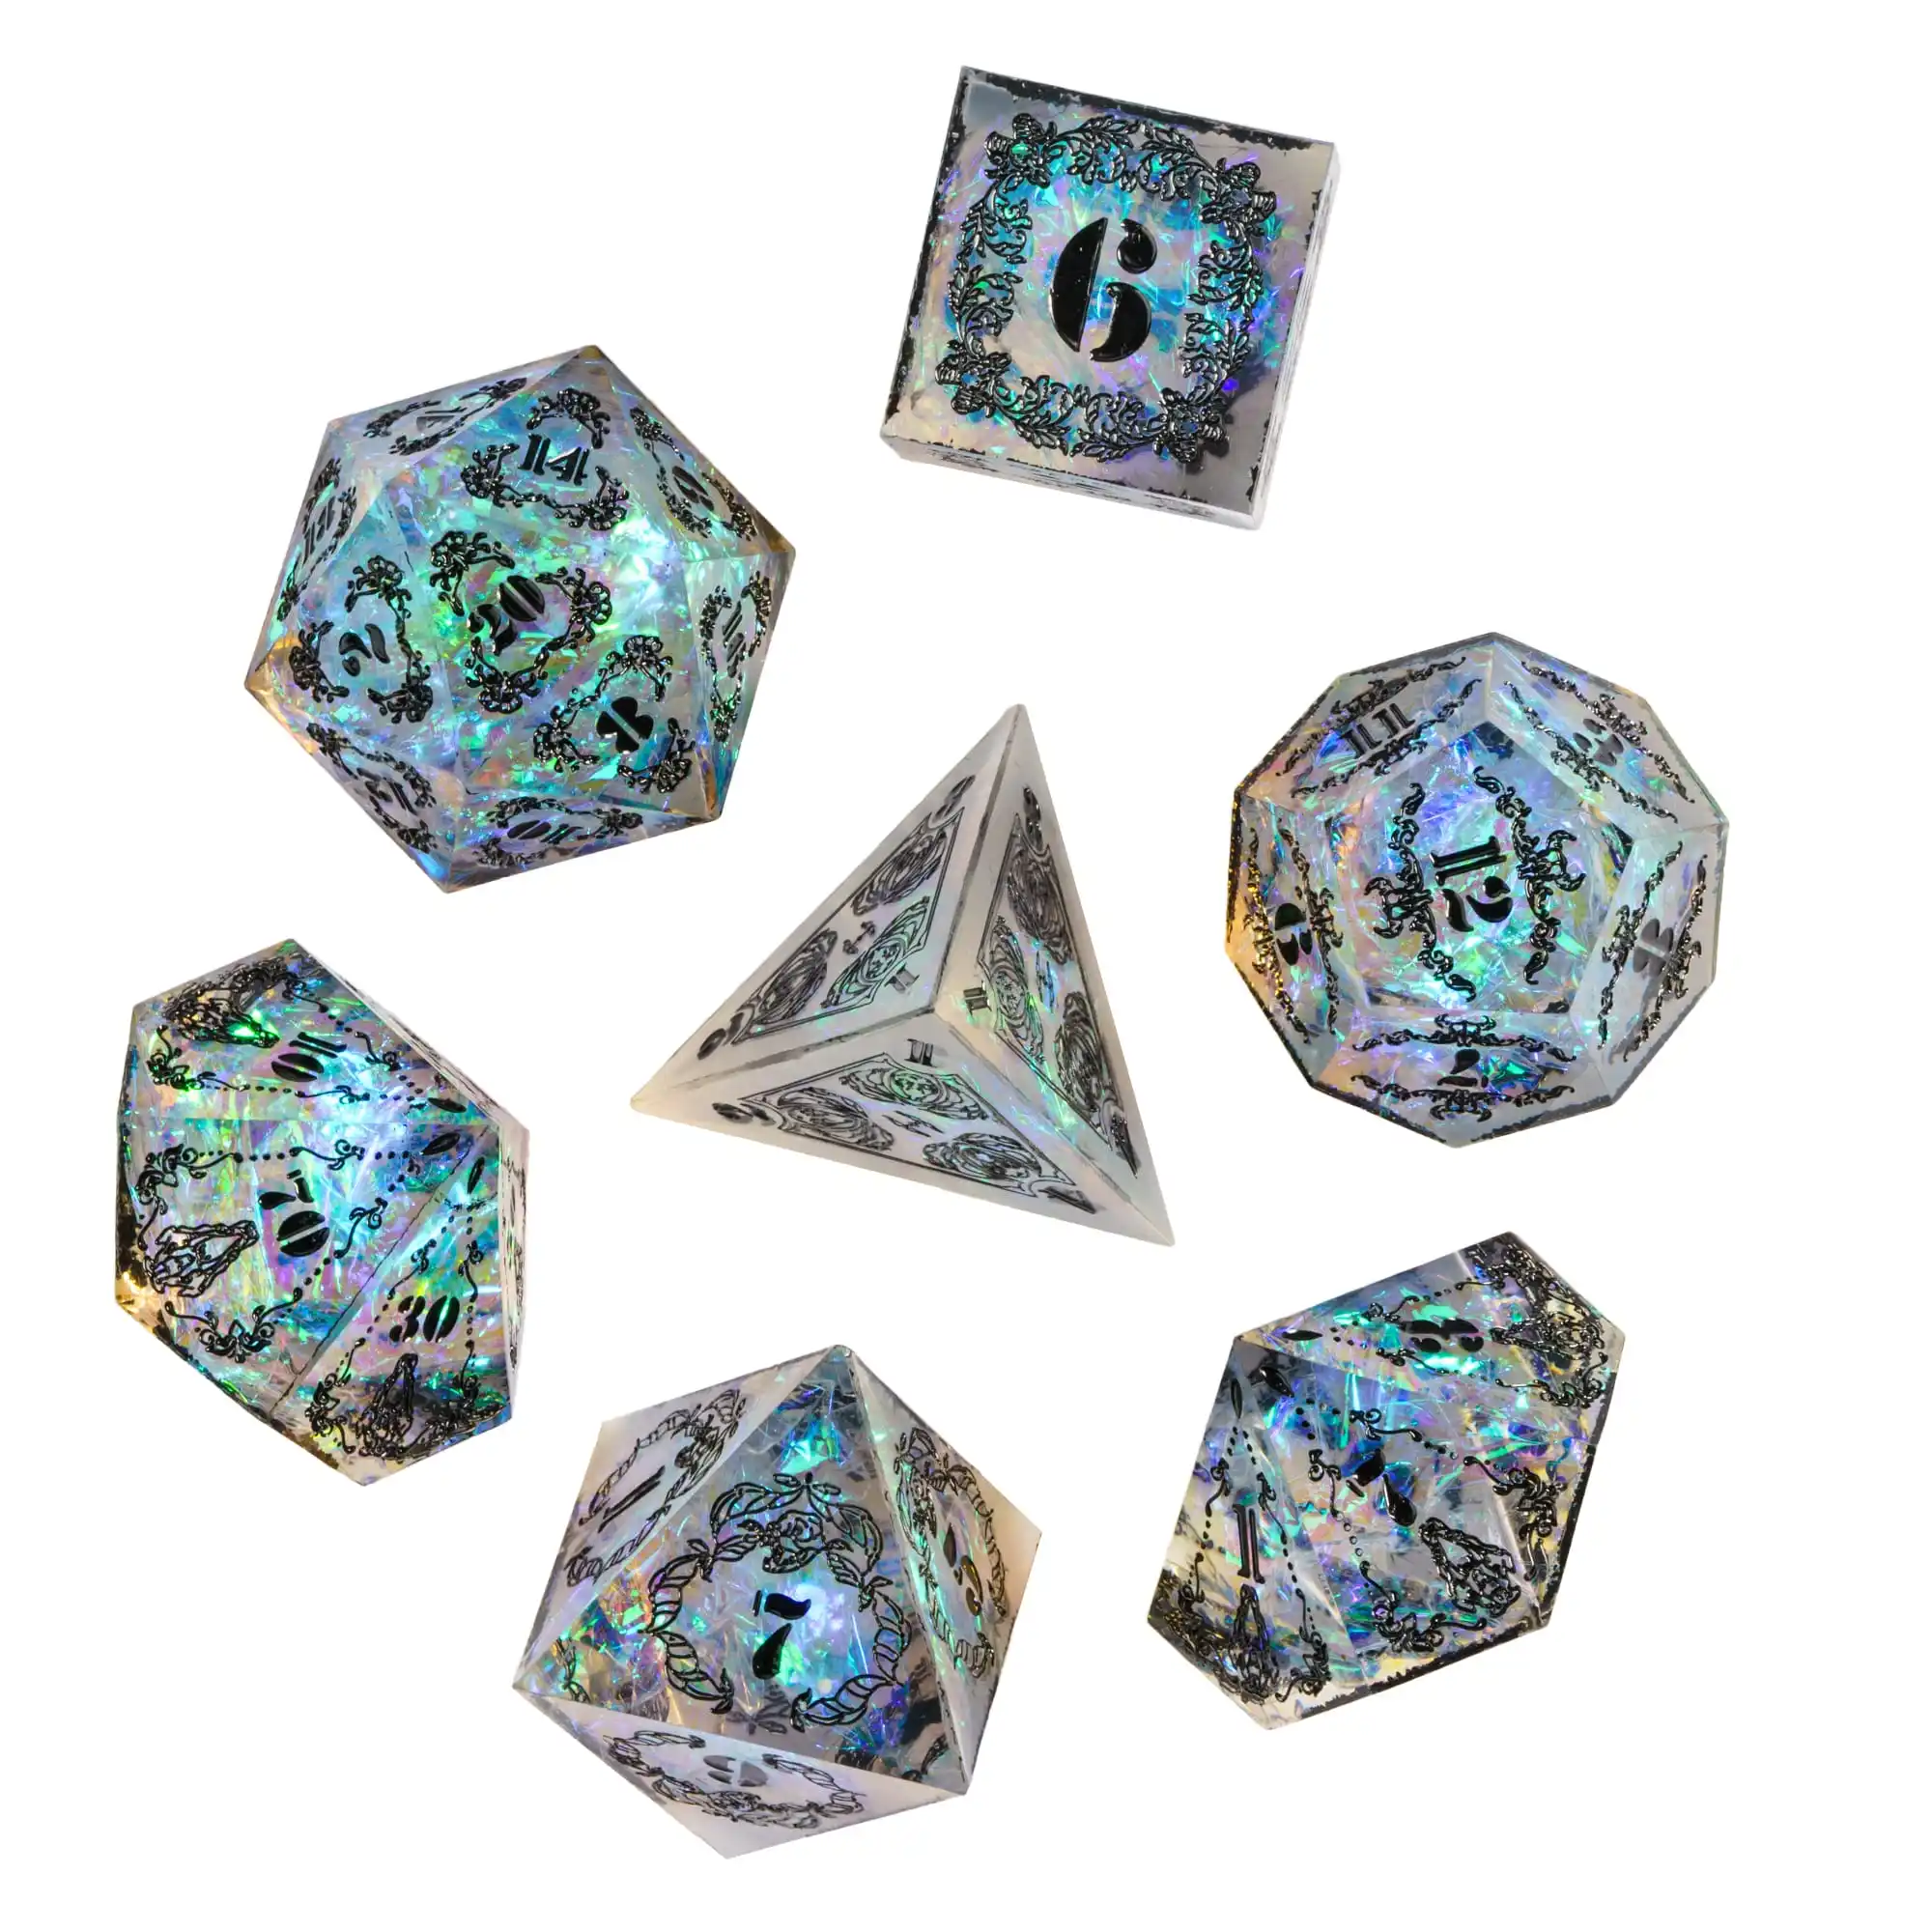 

CRITALLIC Sharp Edges DND Dice New 7Pcs Pattern D&D Games Dice Handcrafted Polyhedral Dice Set for Role Playing Game Pathfinder